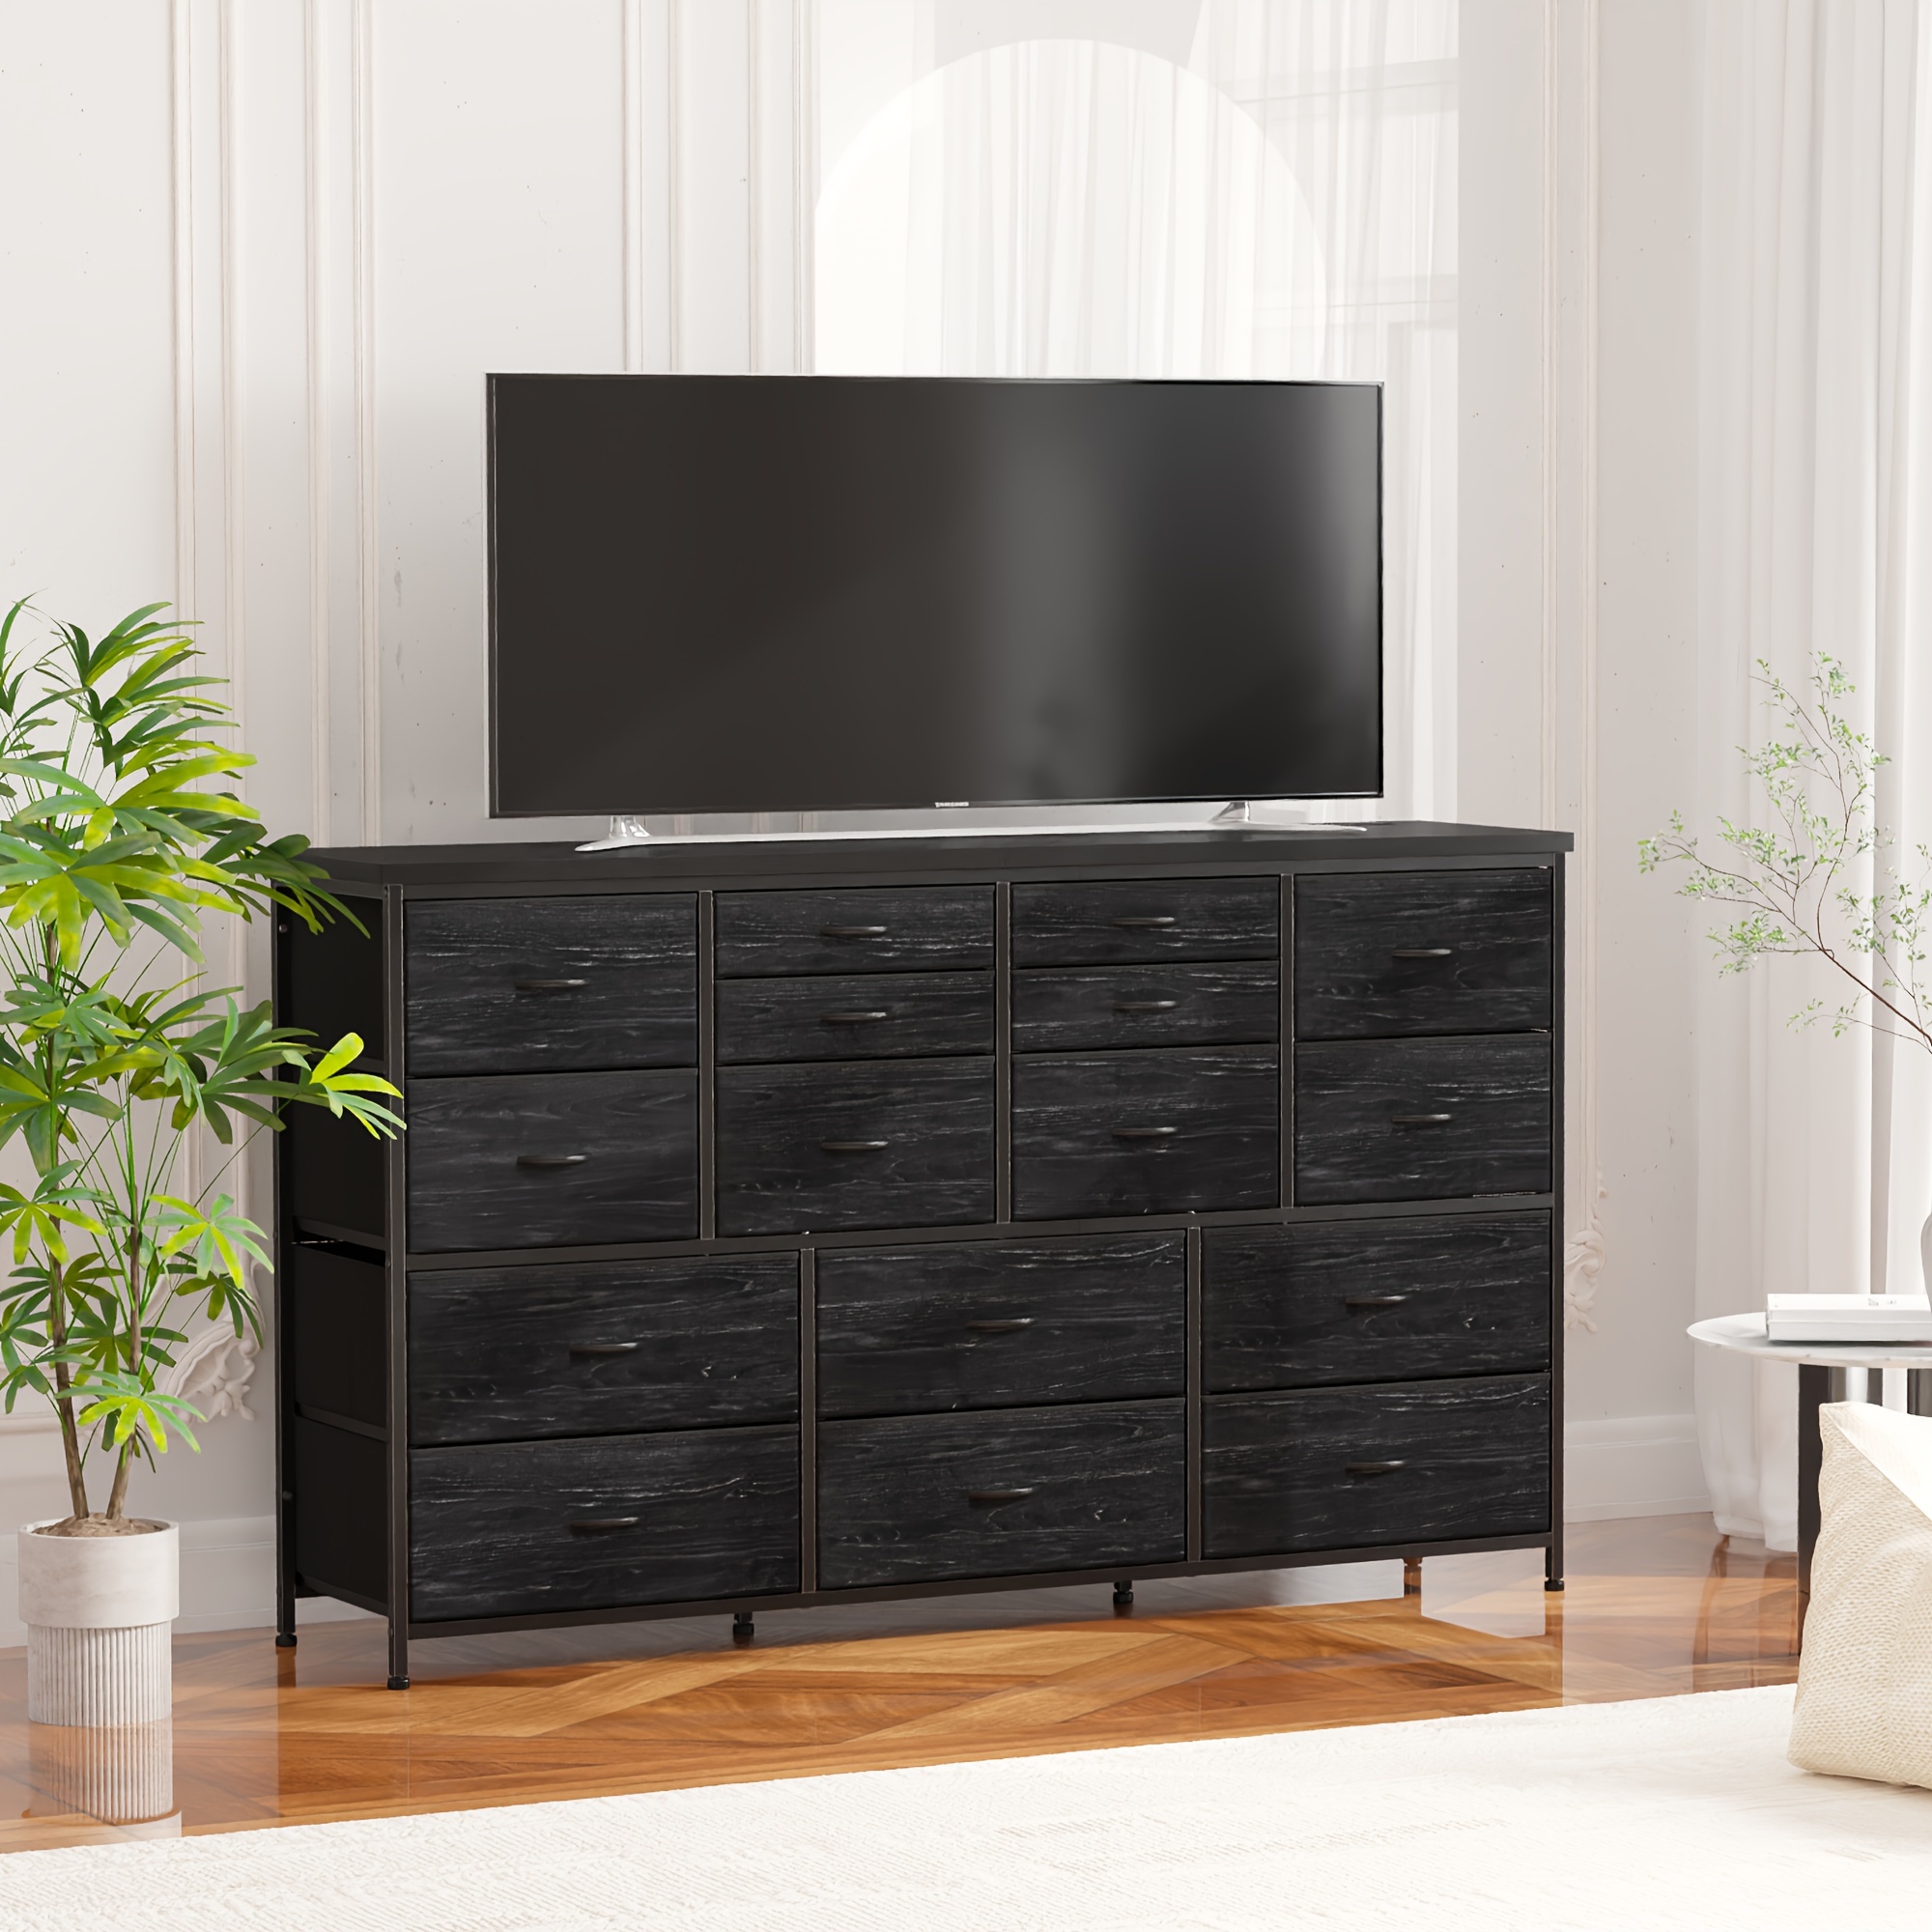 

Dresser Tv Stand With Power Outlet Tv Stands For Living Room Dresser For Bedroom With 16 Drawers For 60" Tv Stand With Storage Tv Stand For Bedroom Media Table 51.1''w*11.8''*34.8''